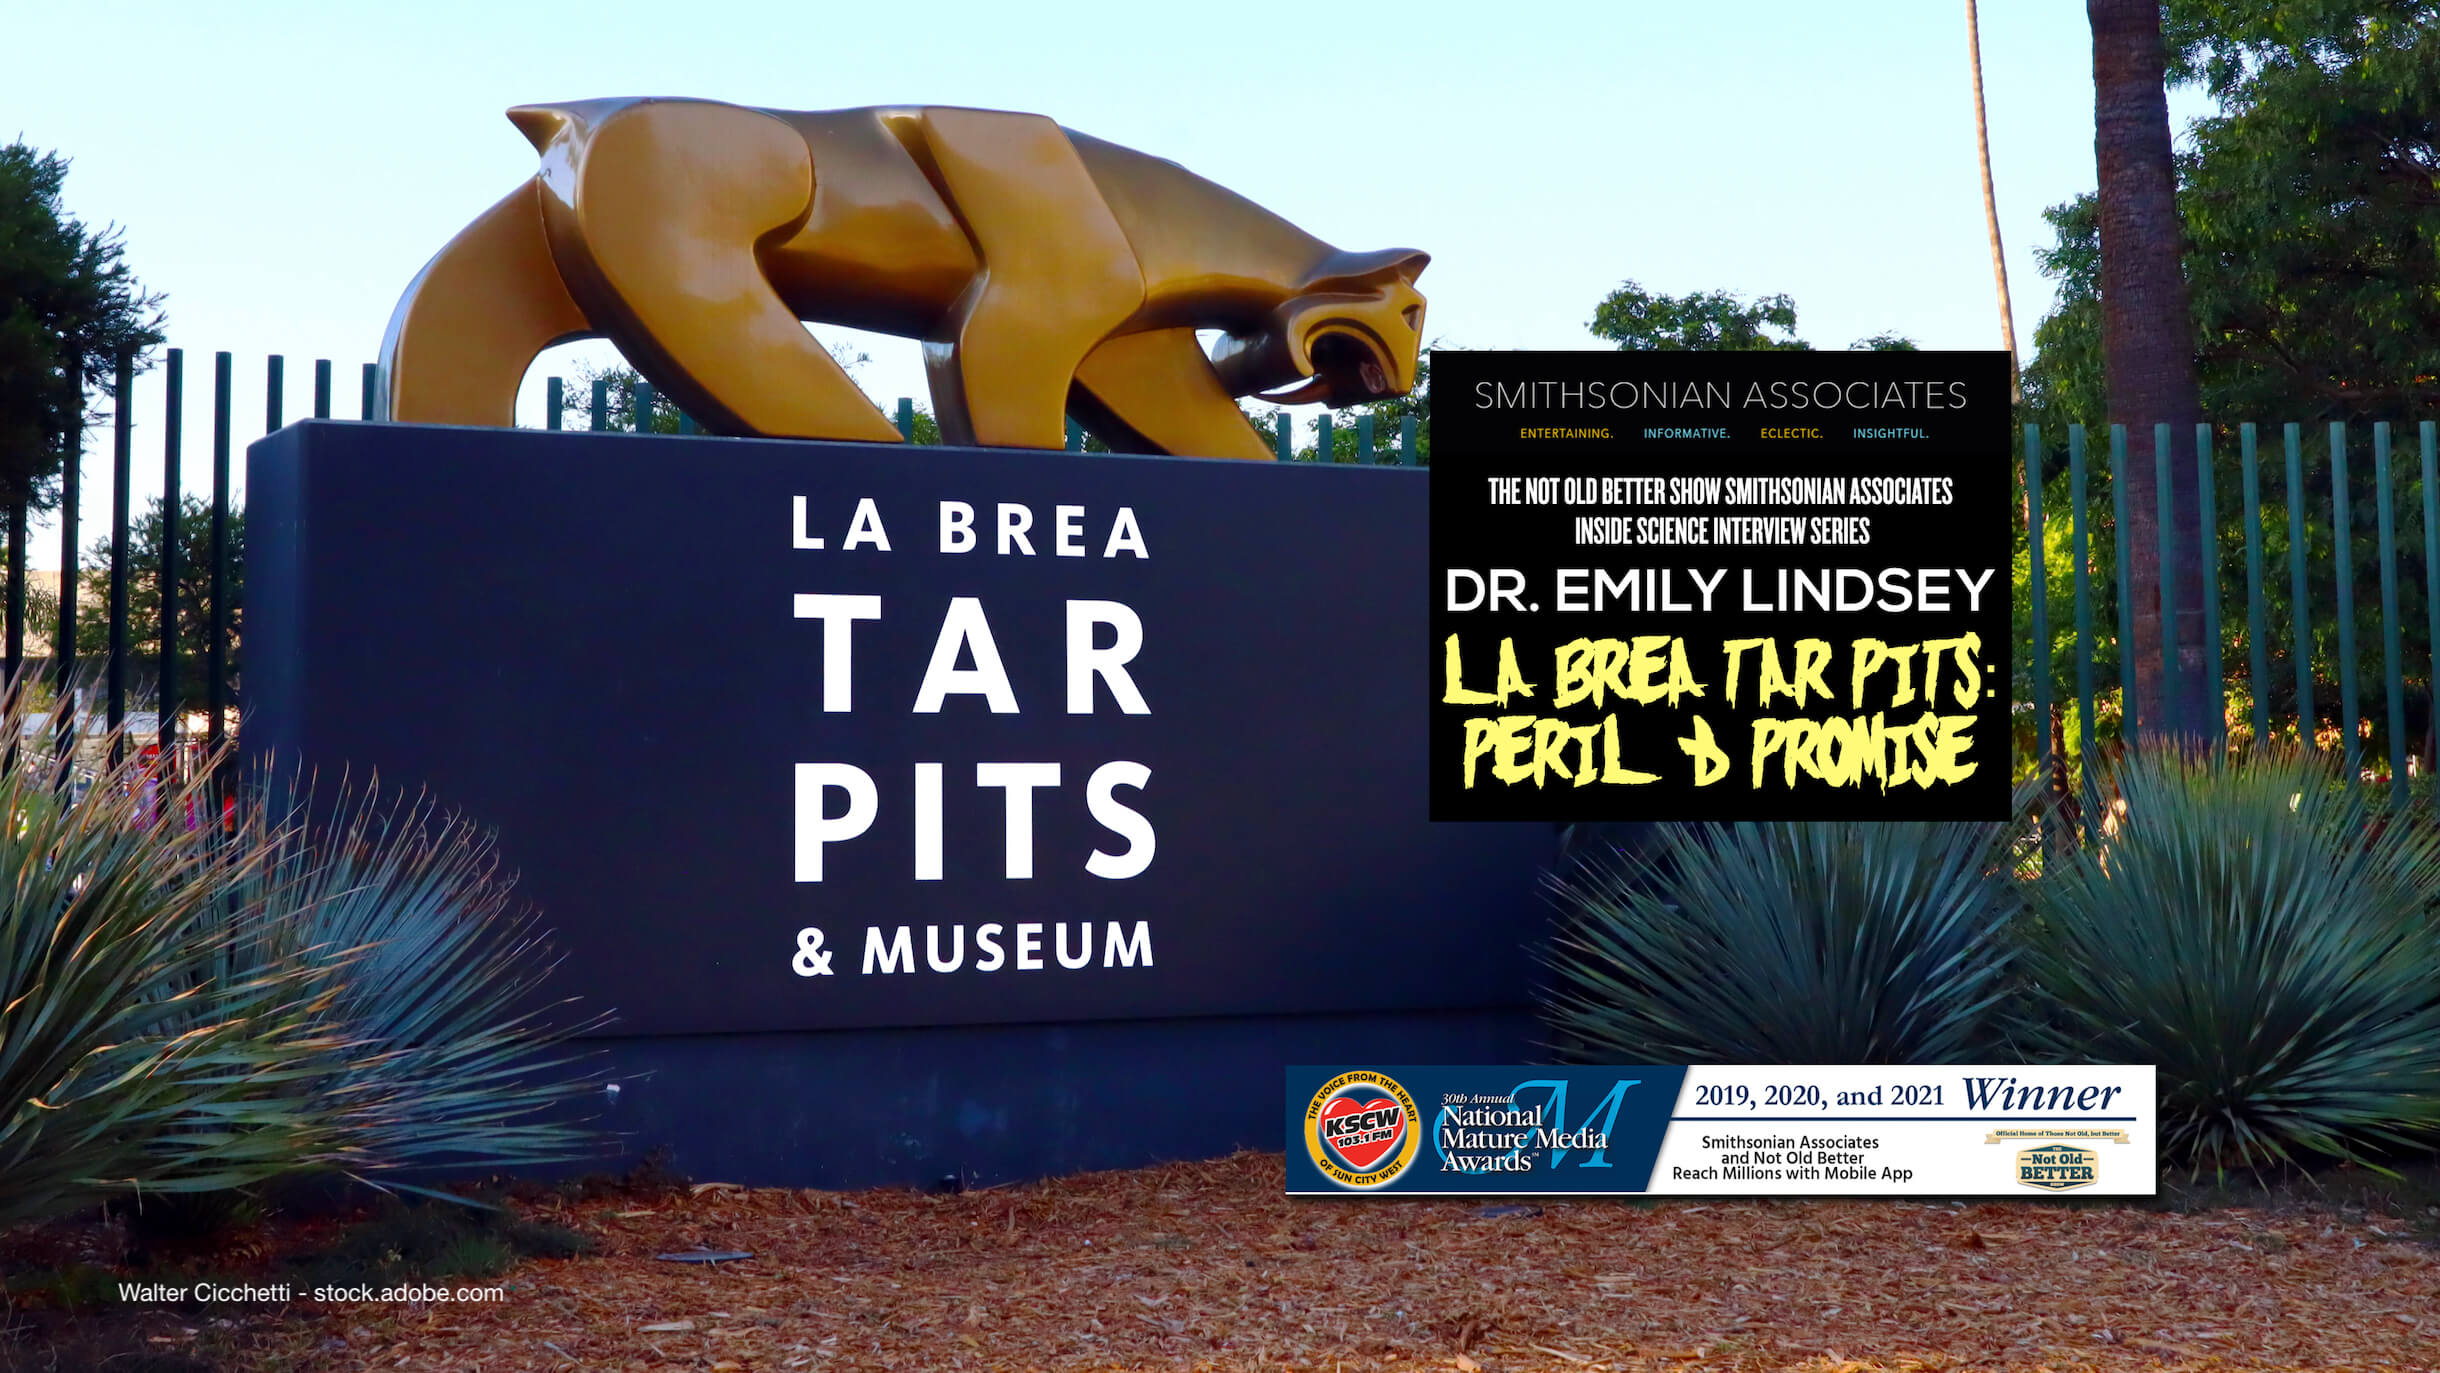 La Brea Tar Pits: Peril and Promise – Dr. Emily Lindsey